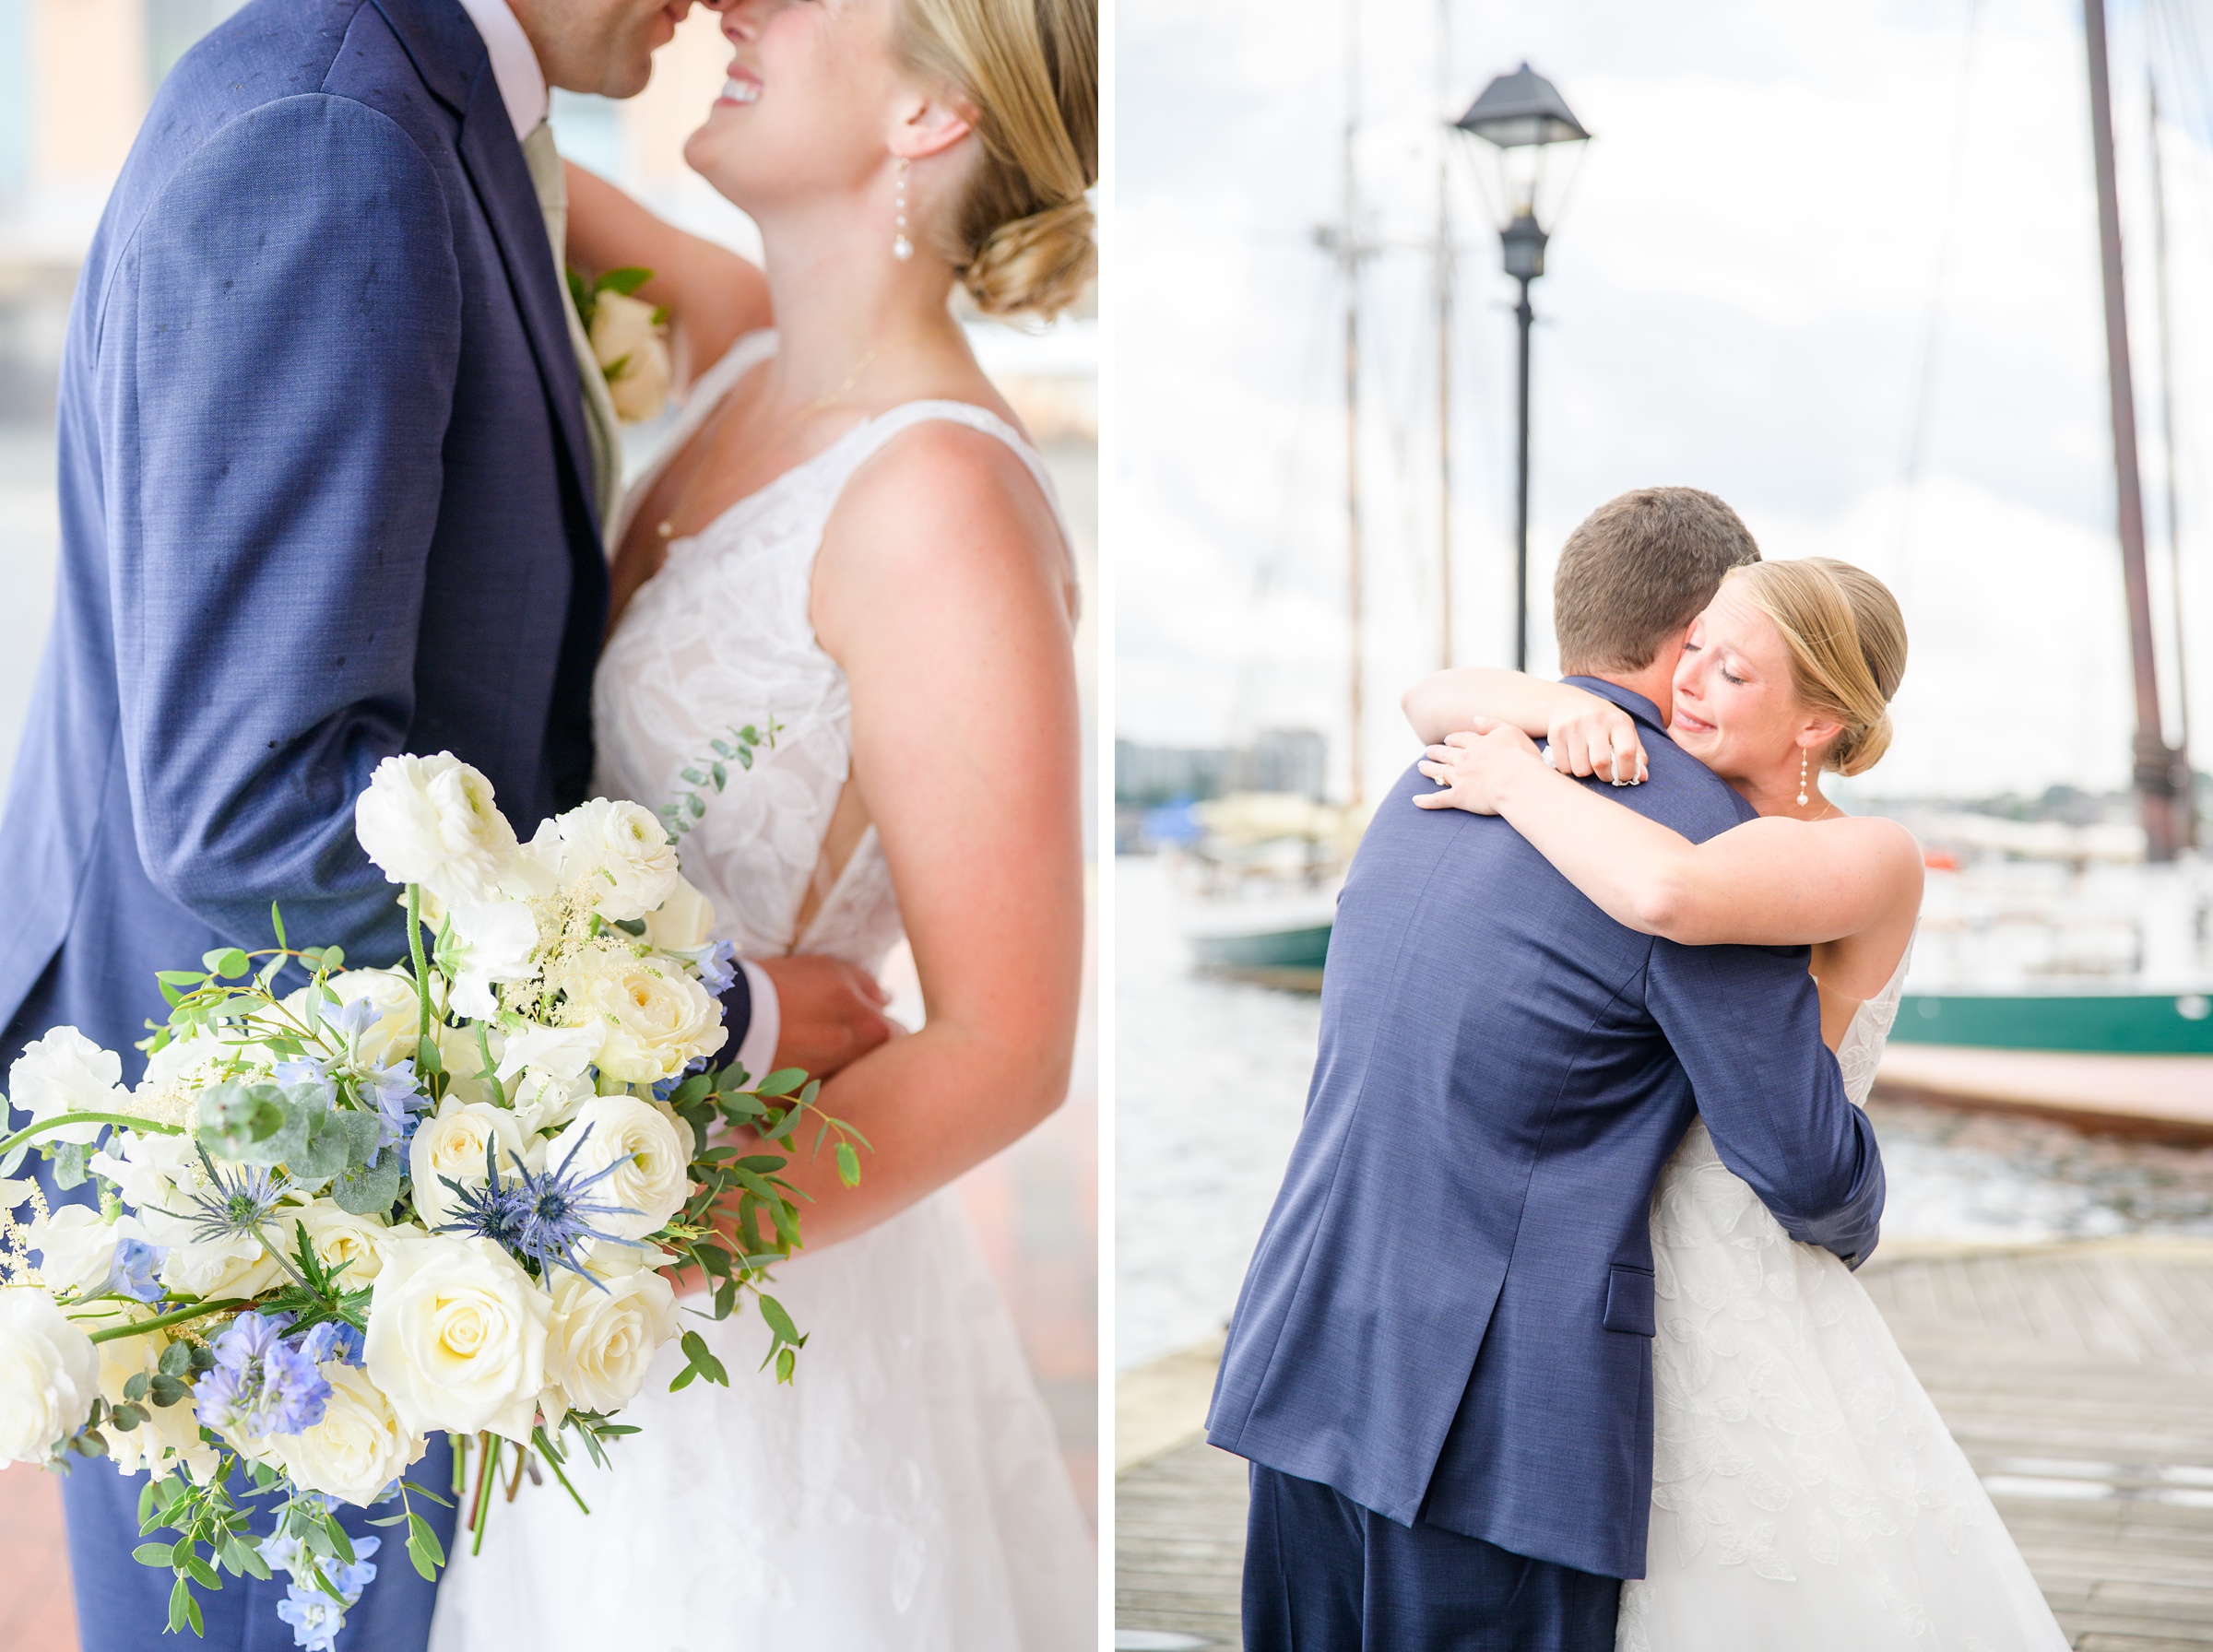 Sage Green and Navy Blue summer wedding at the Frederick Douglass Maritime Museum in Baltimore, Maryland. Photographed by Baltimore Wedding Photographer Cait Kramer Photography